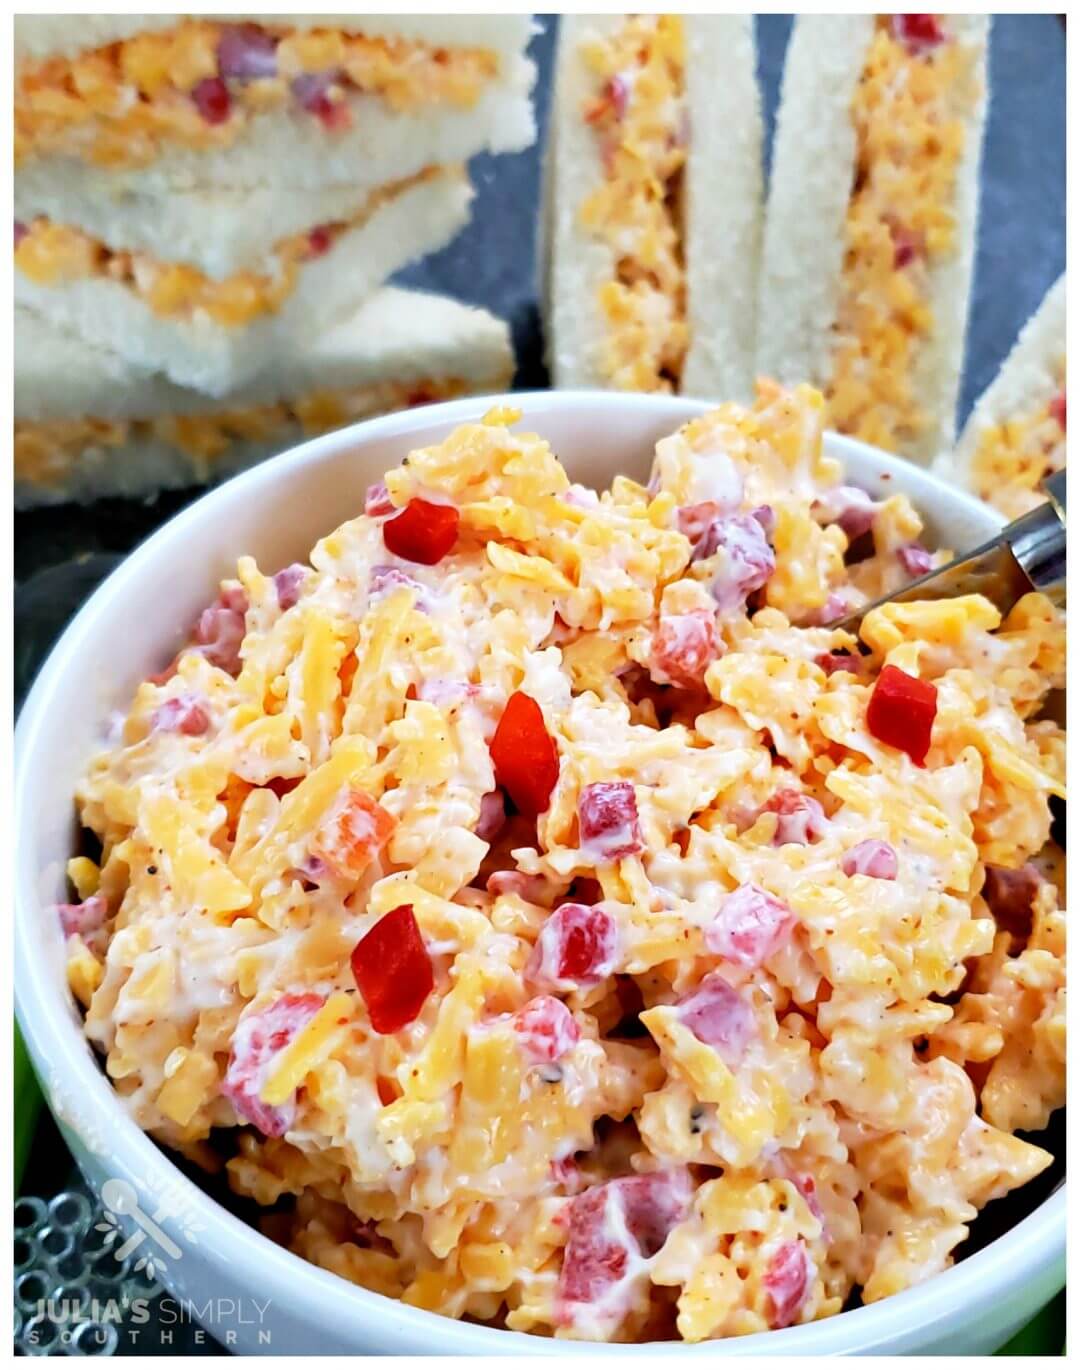 Classic Southern Pimento Cheese Recipe Julias Simply Southern